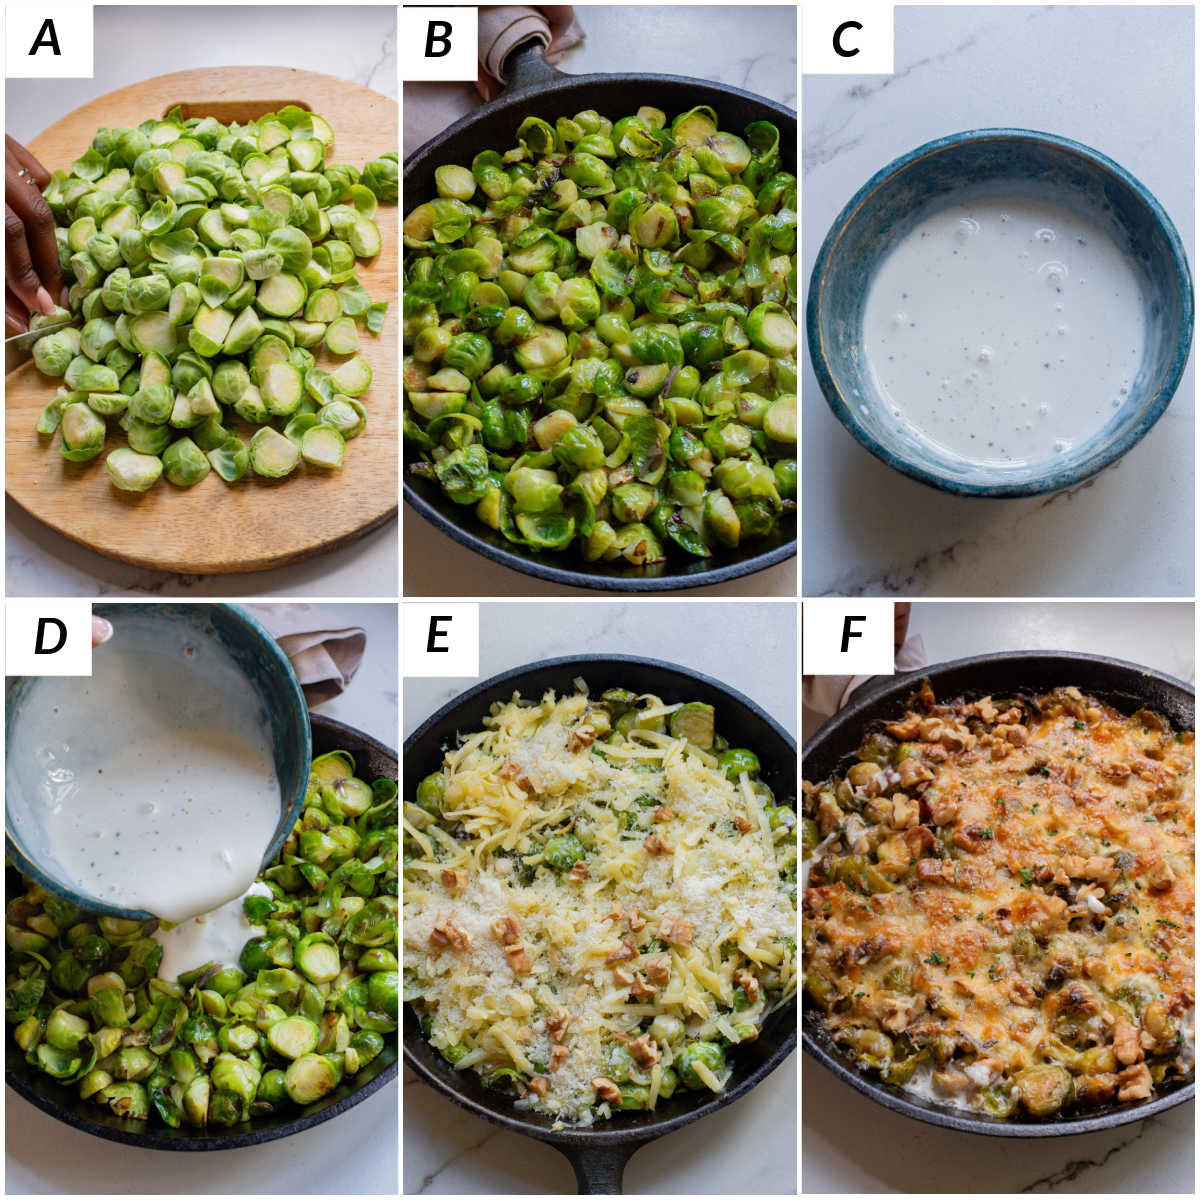 image collage showing the steps for making brussel sprouts gratin